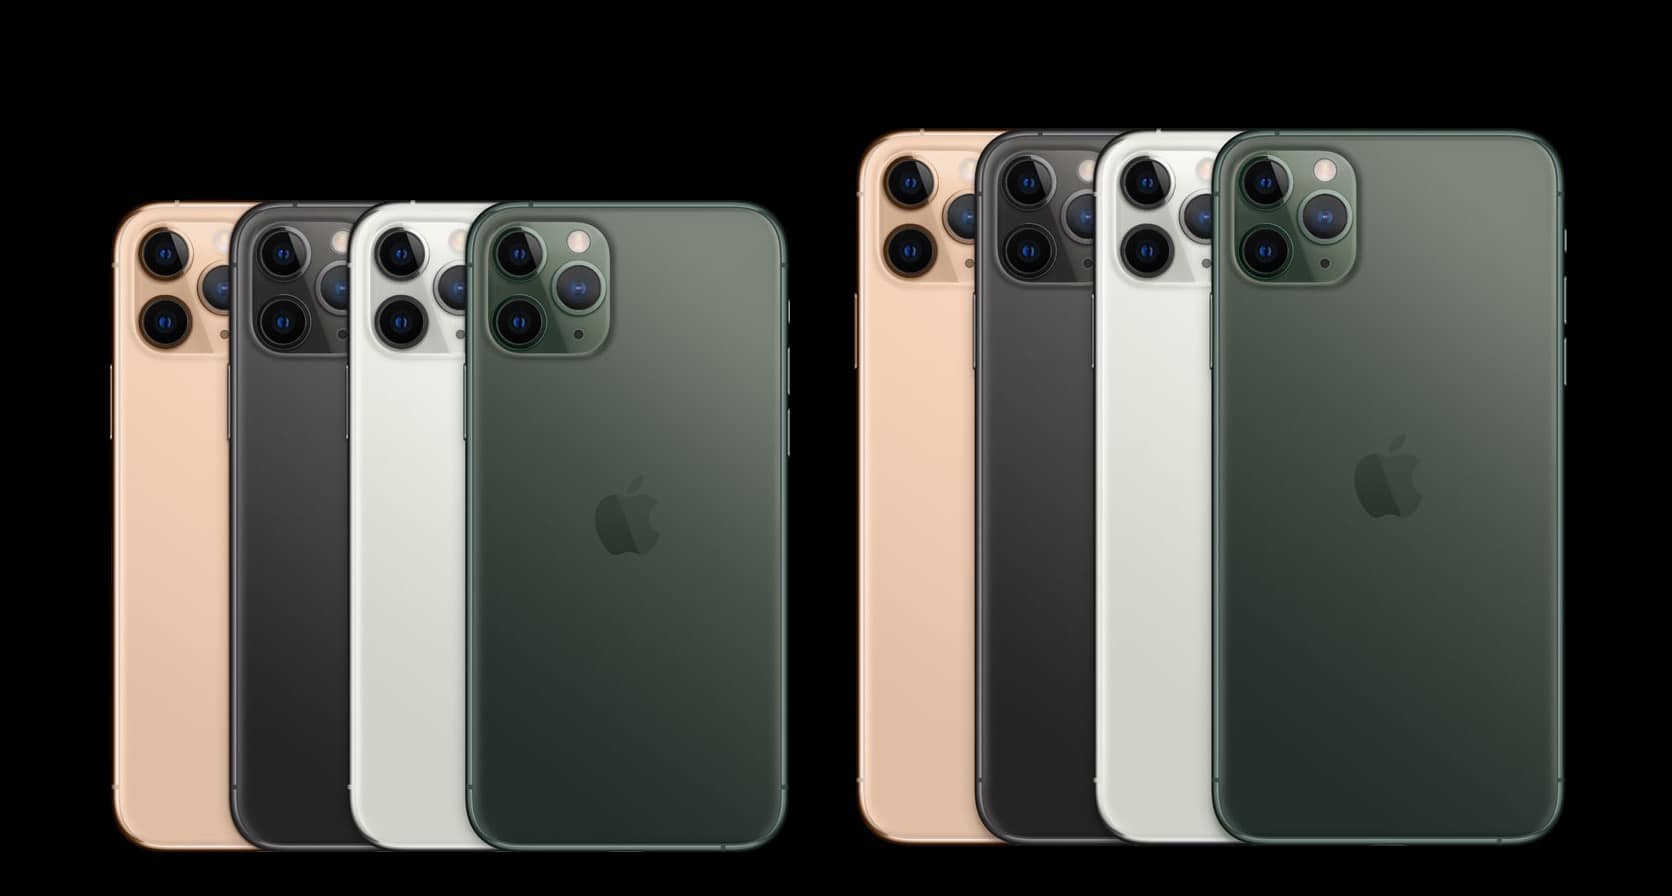 Matte finishes are back in with iPhone 11 Pro.